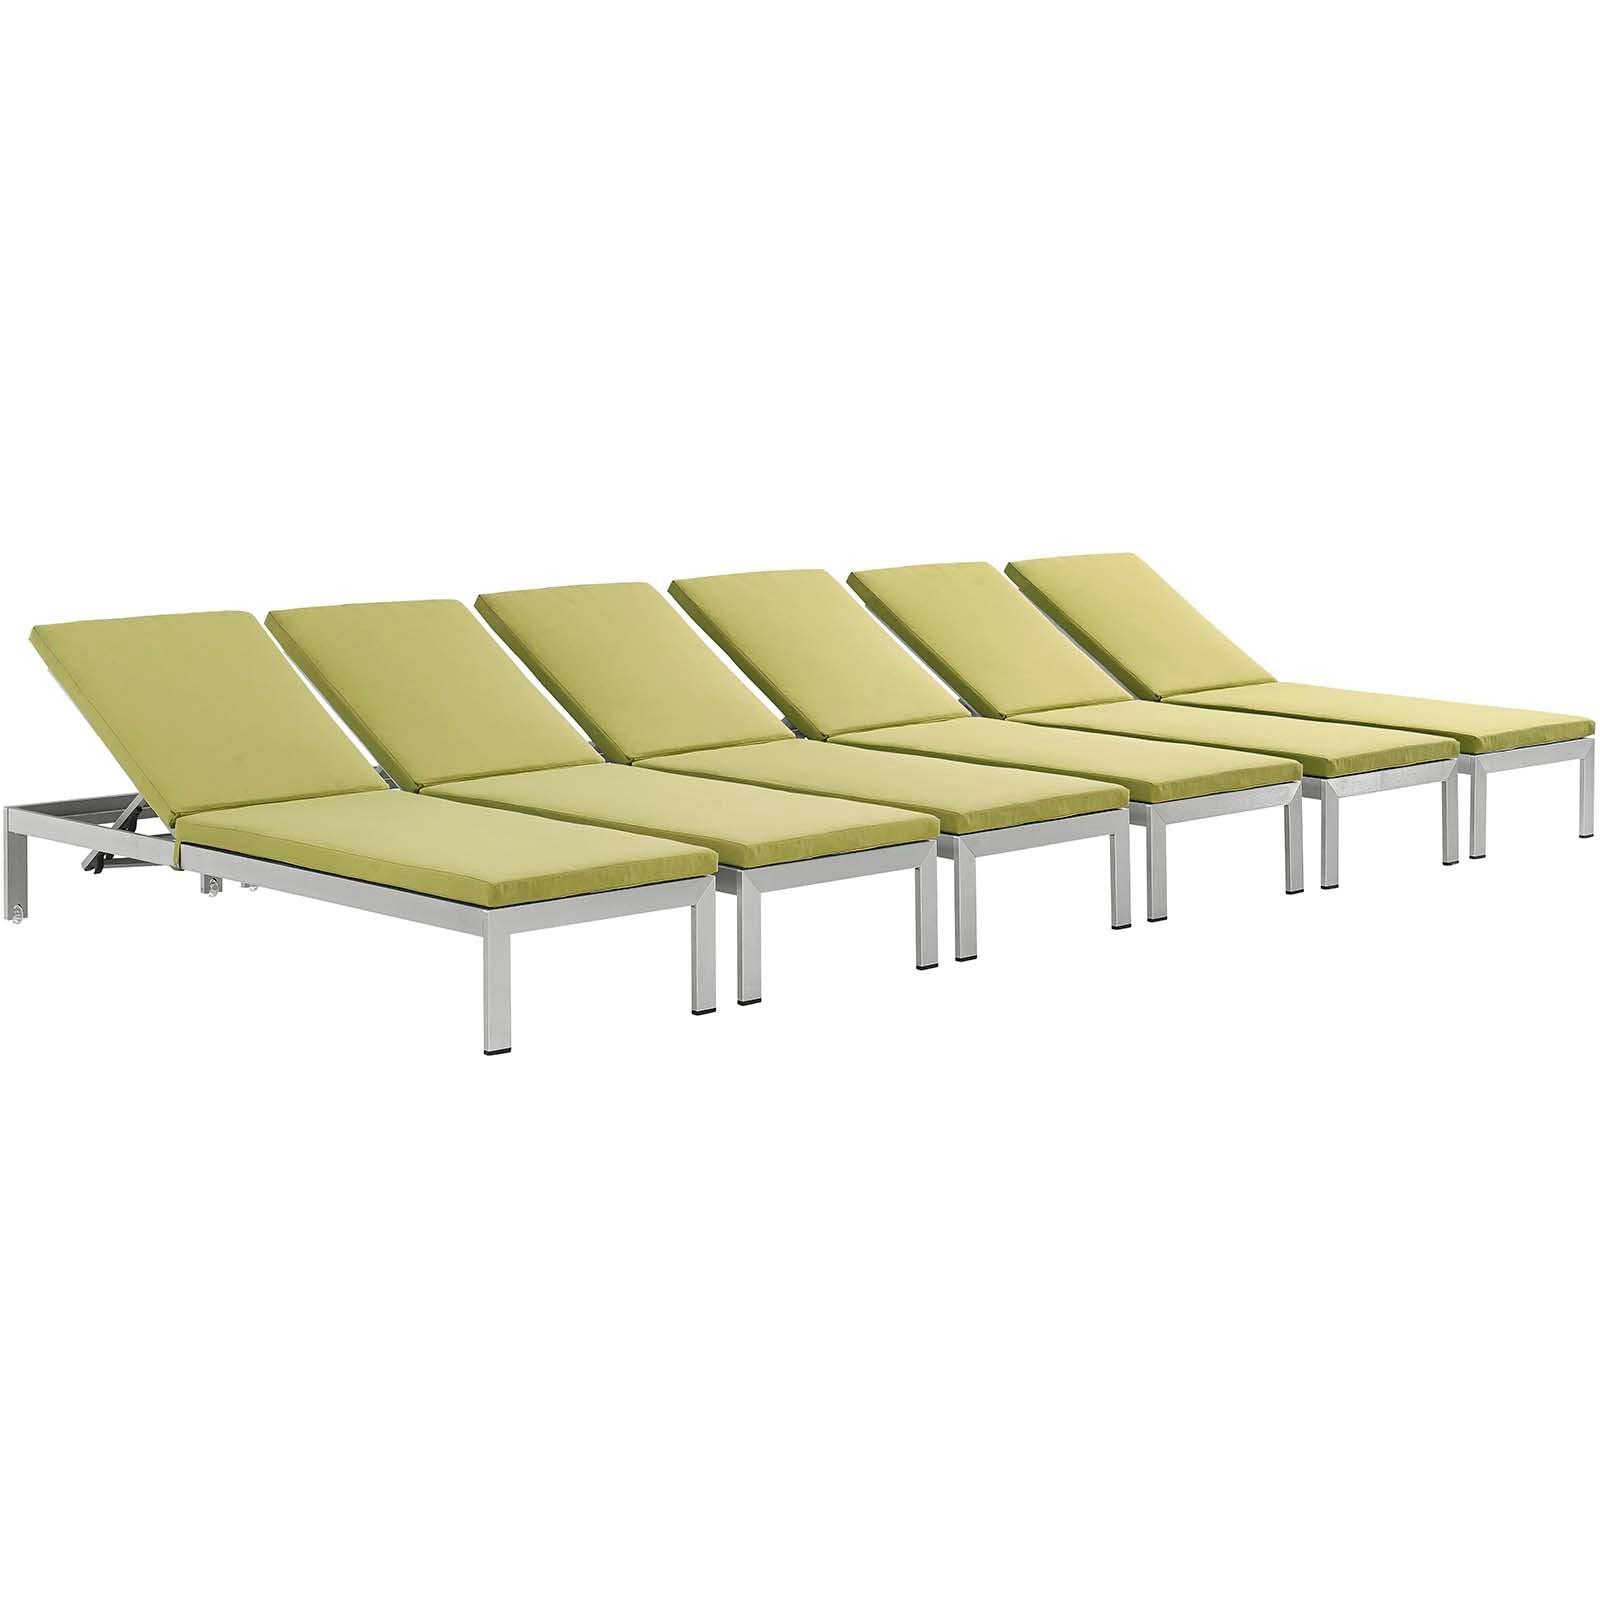 Modway Shore Chaise with Cushions Outdoor Patio Aluminum Set of 6 FredCo